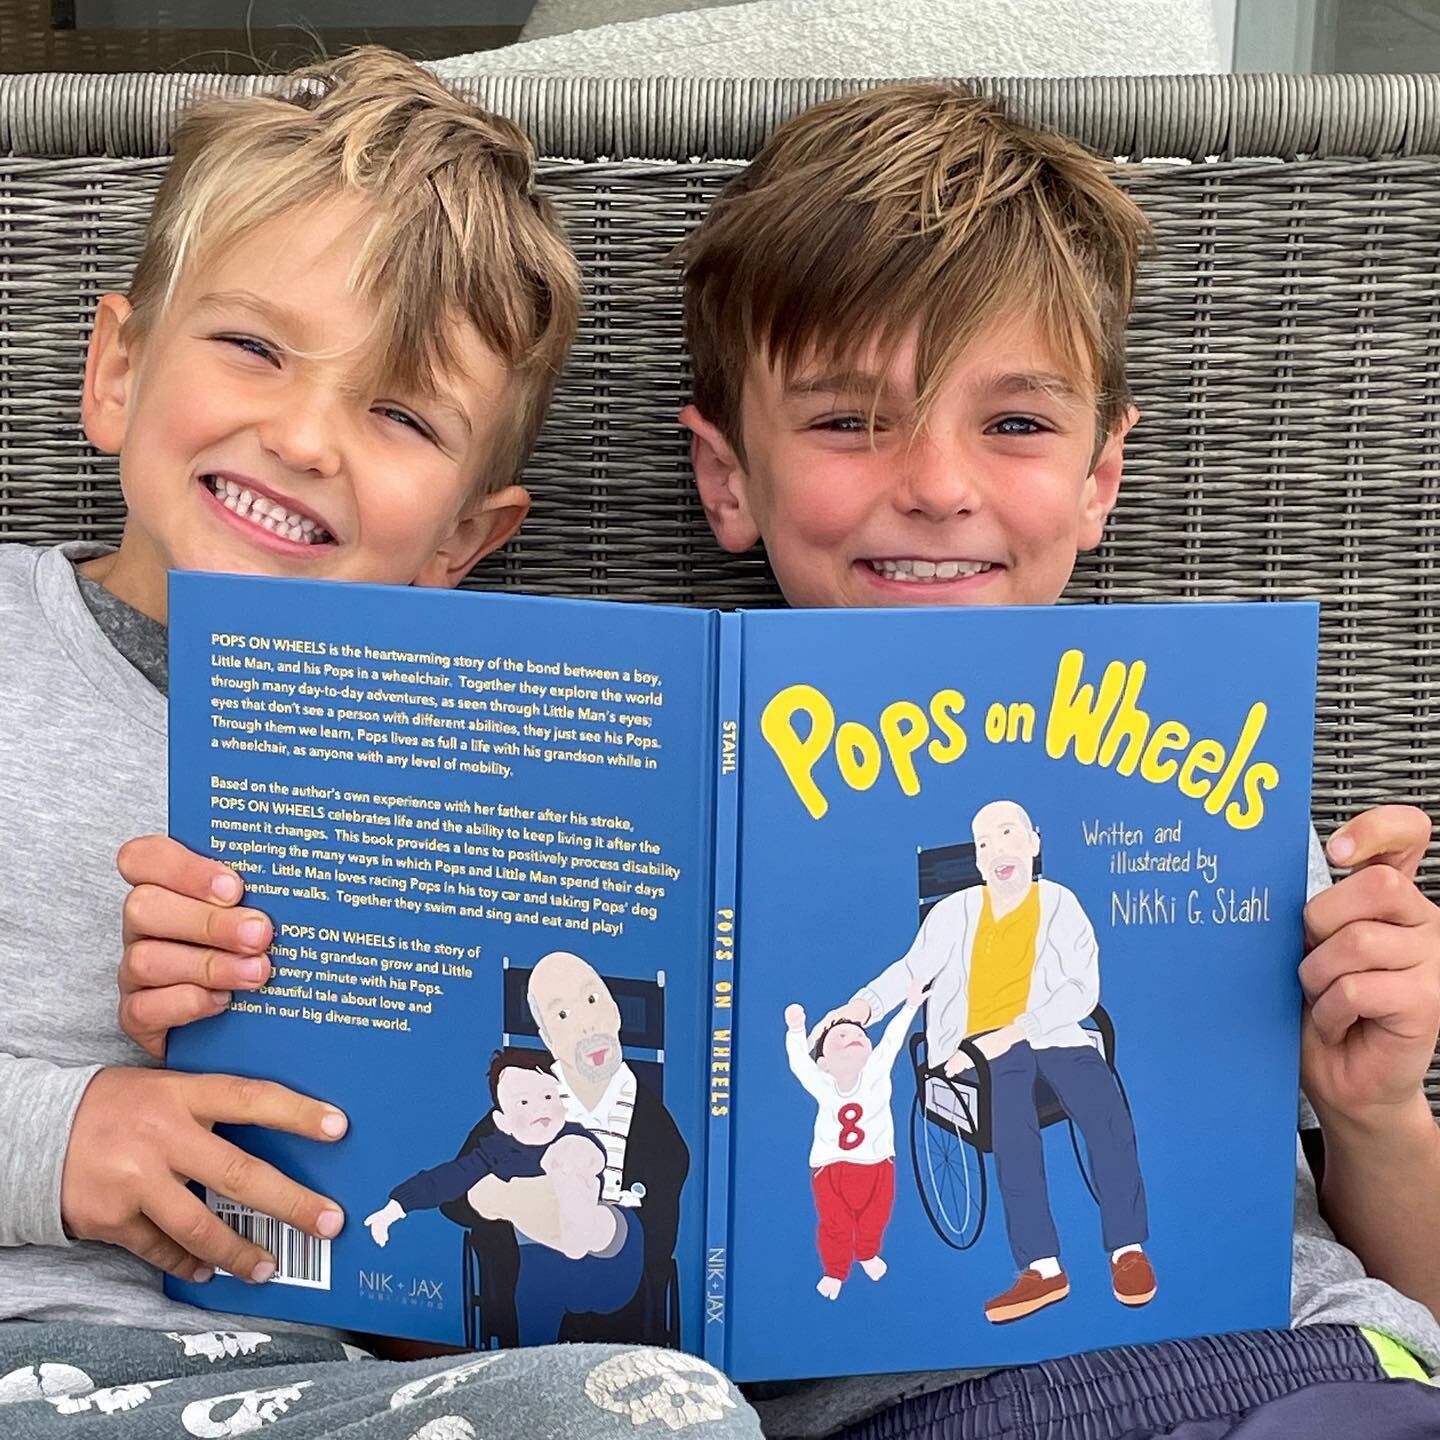 We love seeing big smiles and happy readers!!! Thanks for sharing your Pops moments with us! 💙💙💙
.
.
.
.
.
#readersofinstagram #reader #bookstagram #childrensbooks #youngreaders #disabilitybooks